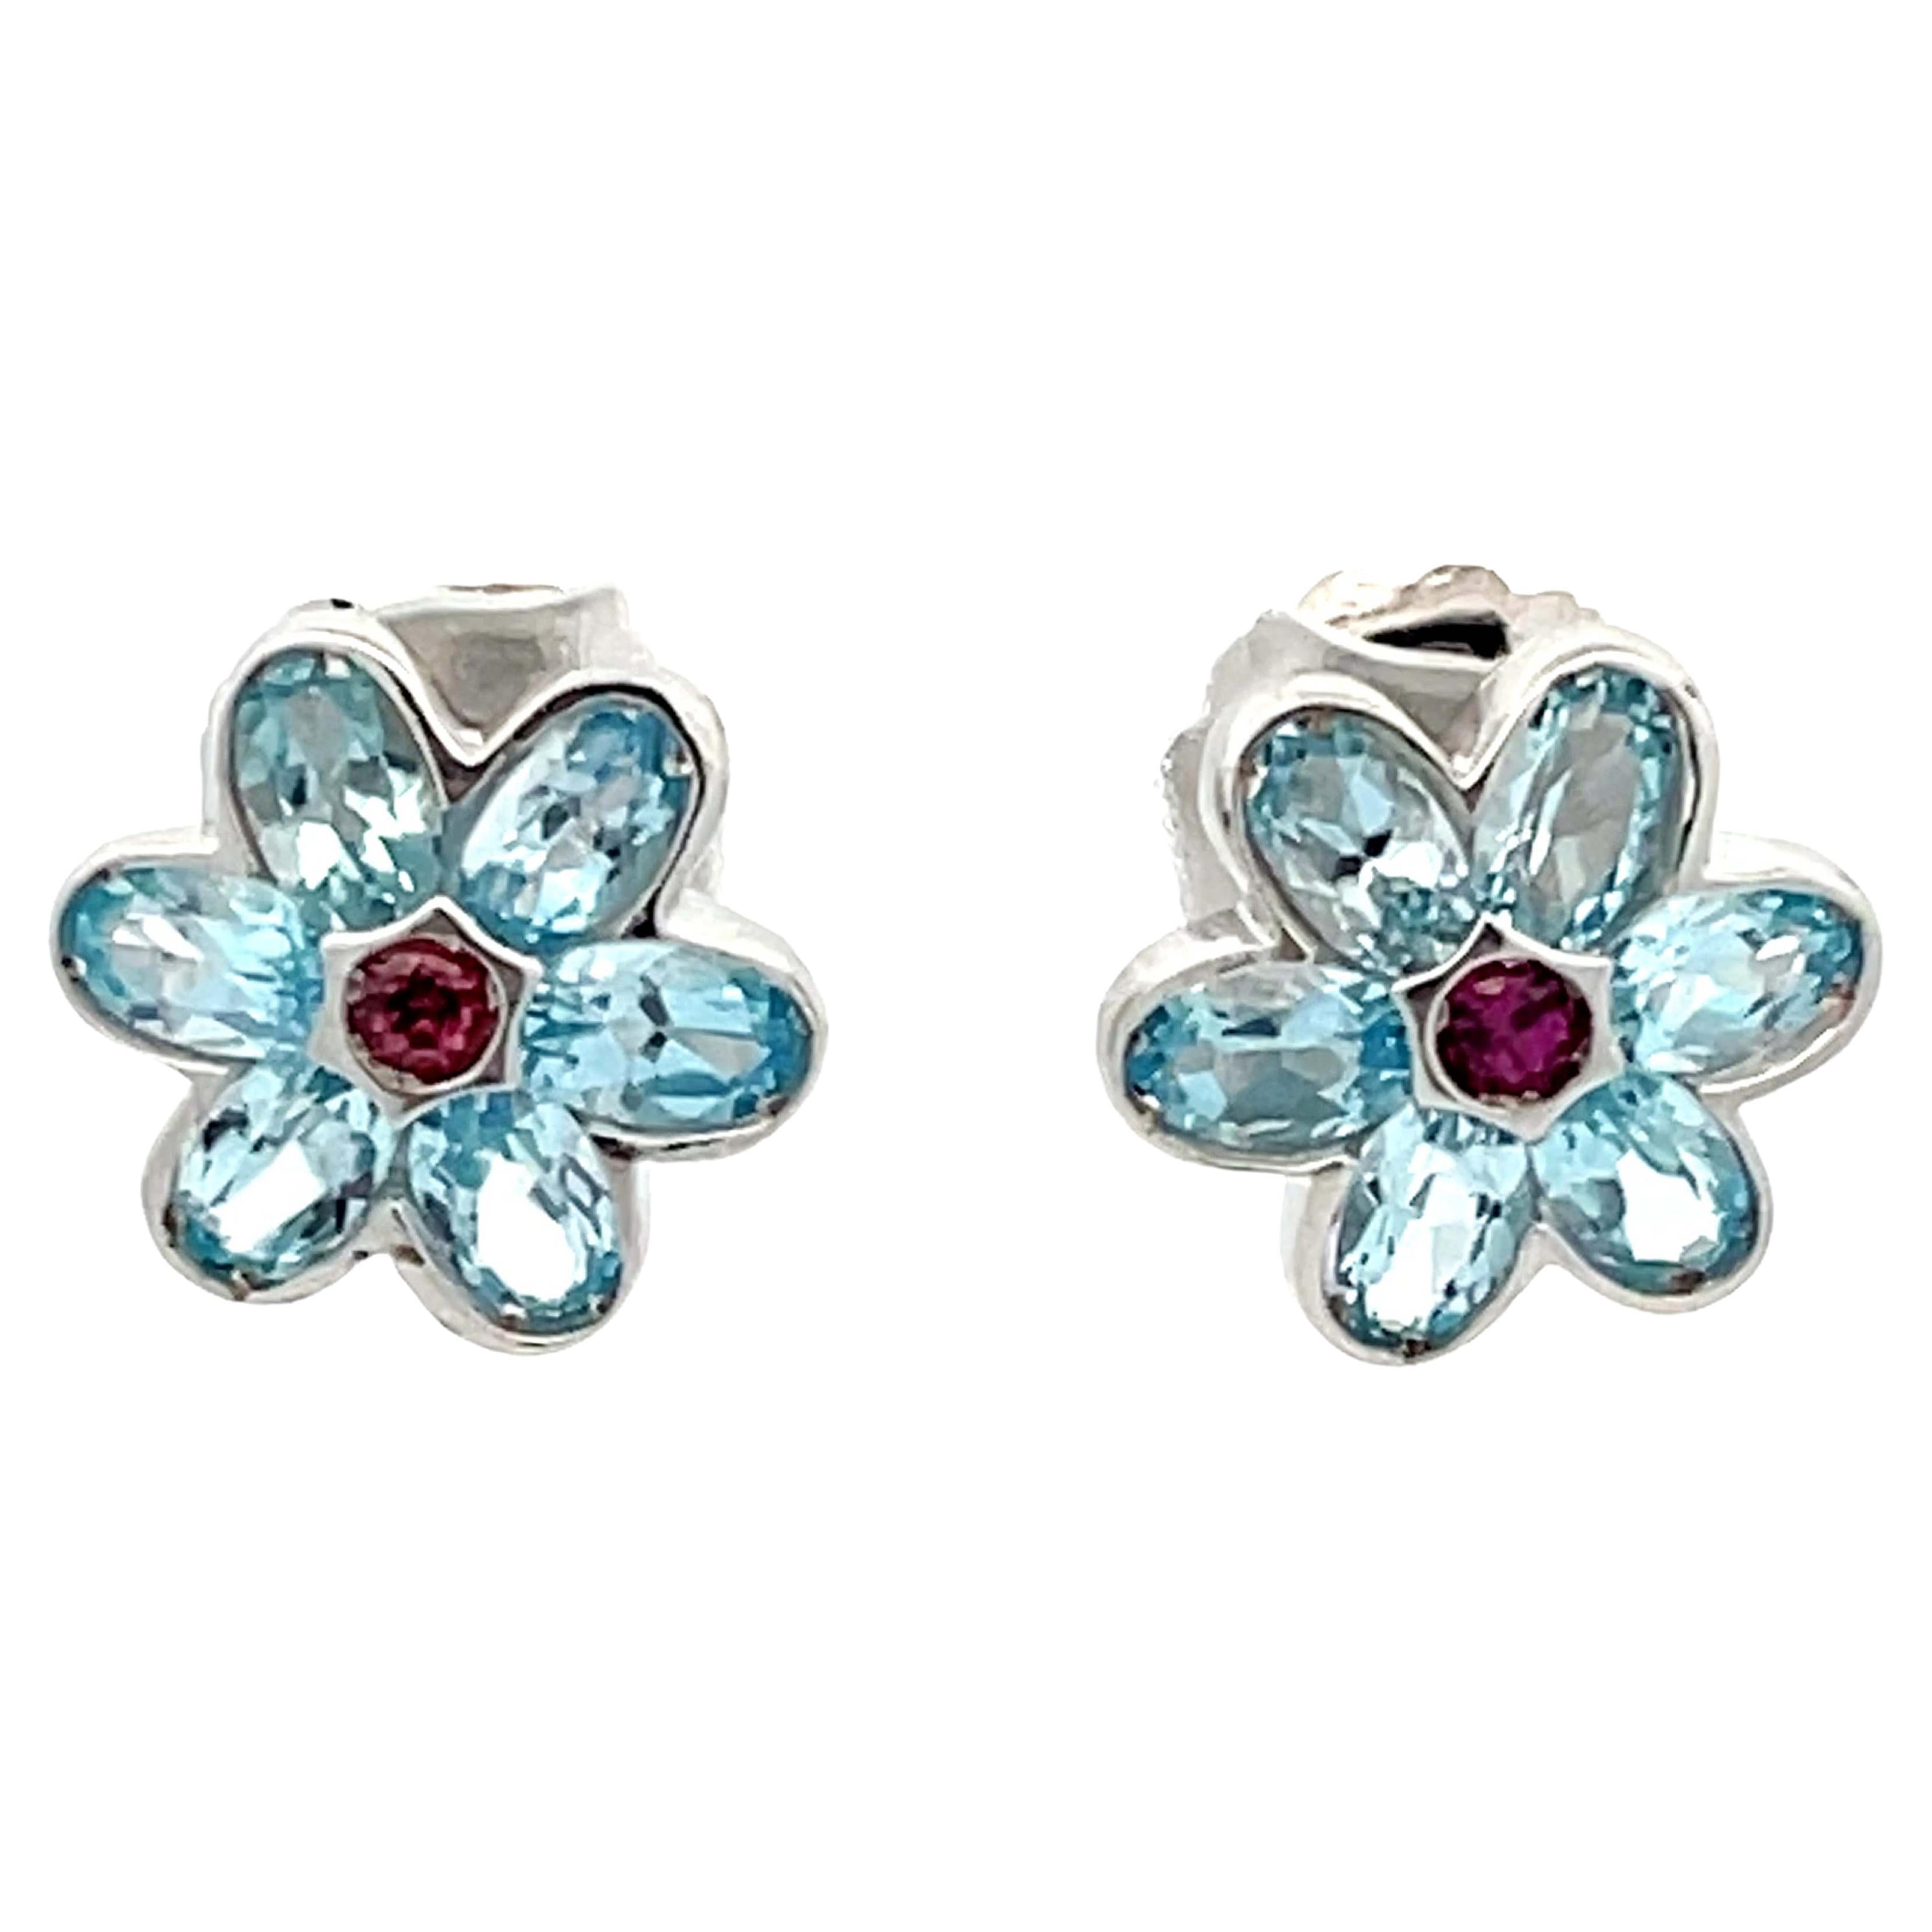 Blue Topaz and Pink Tourmaline Flower Earrings in 14k White Gold